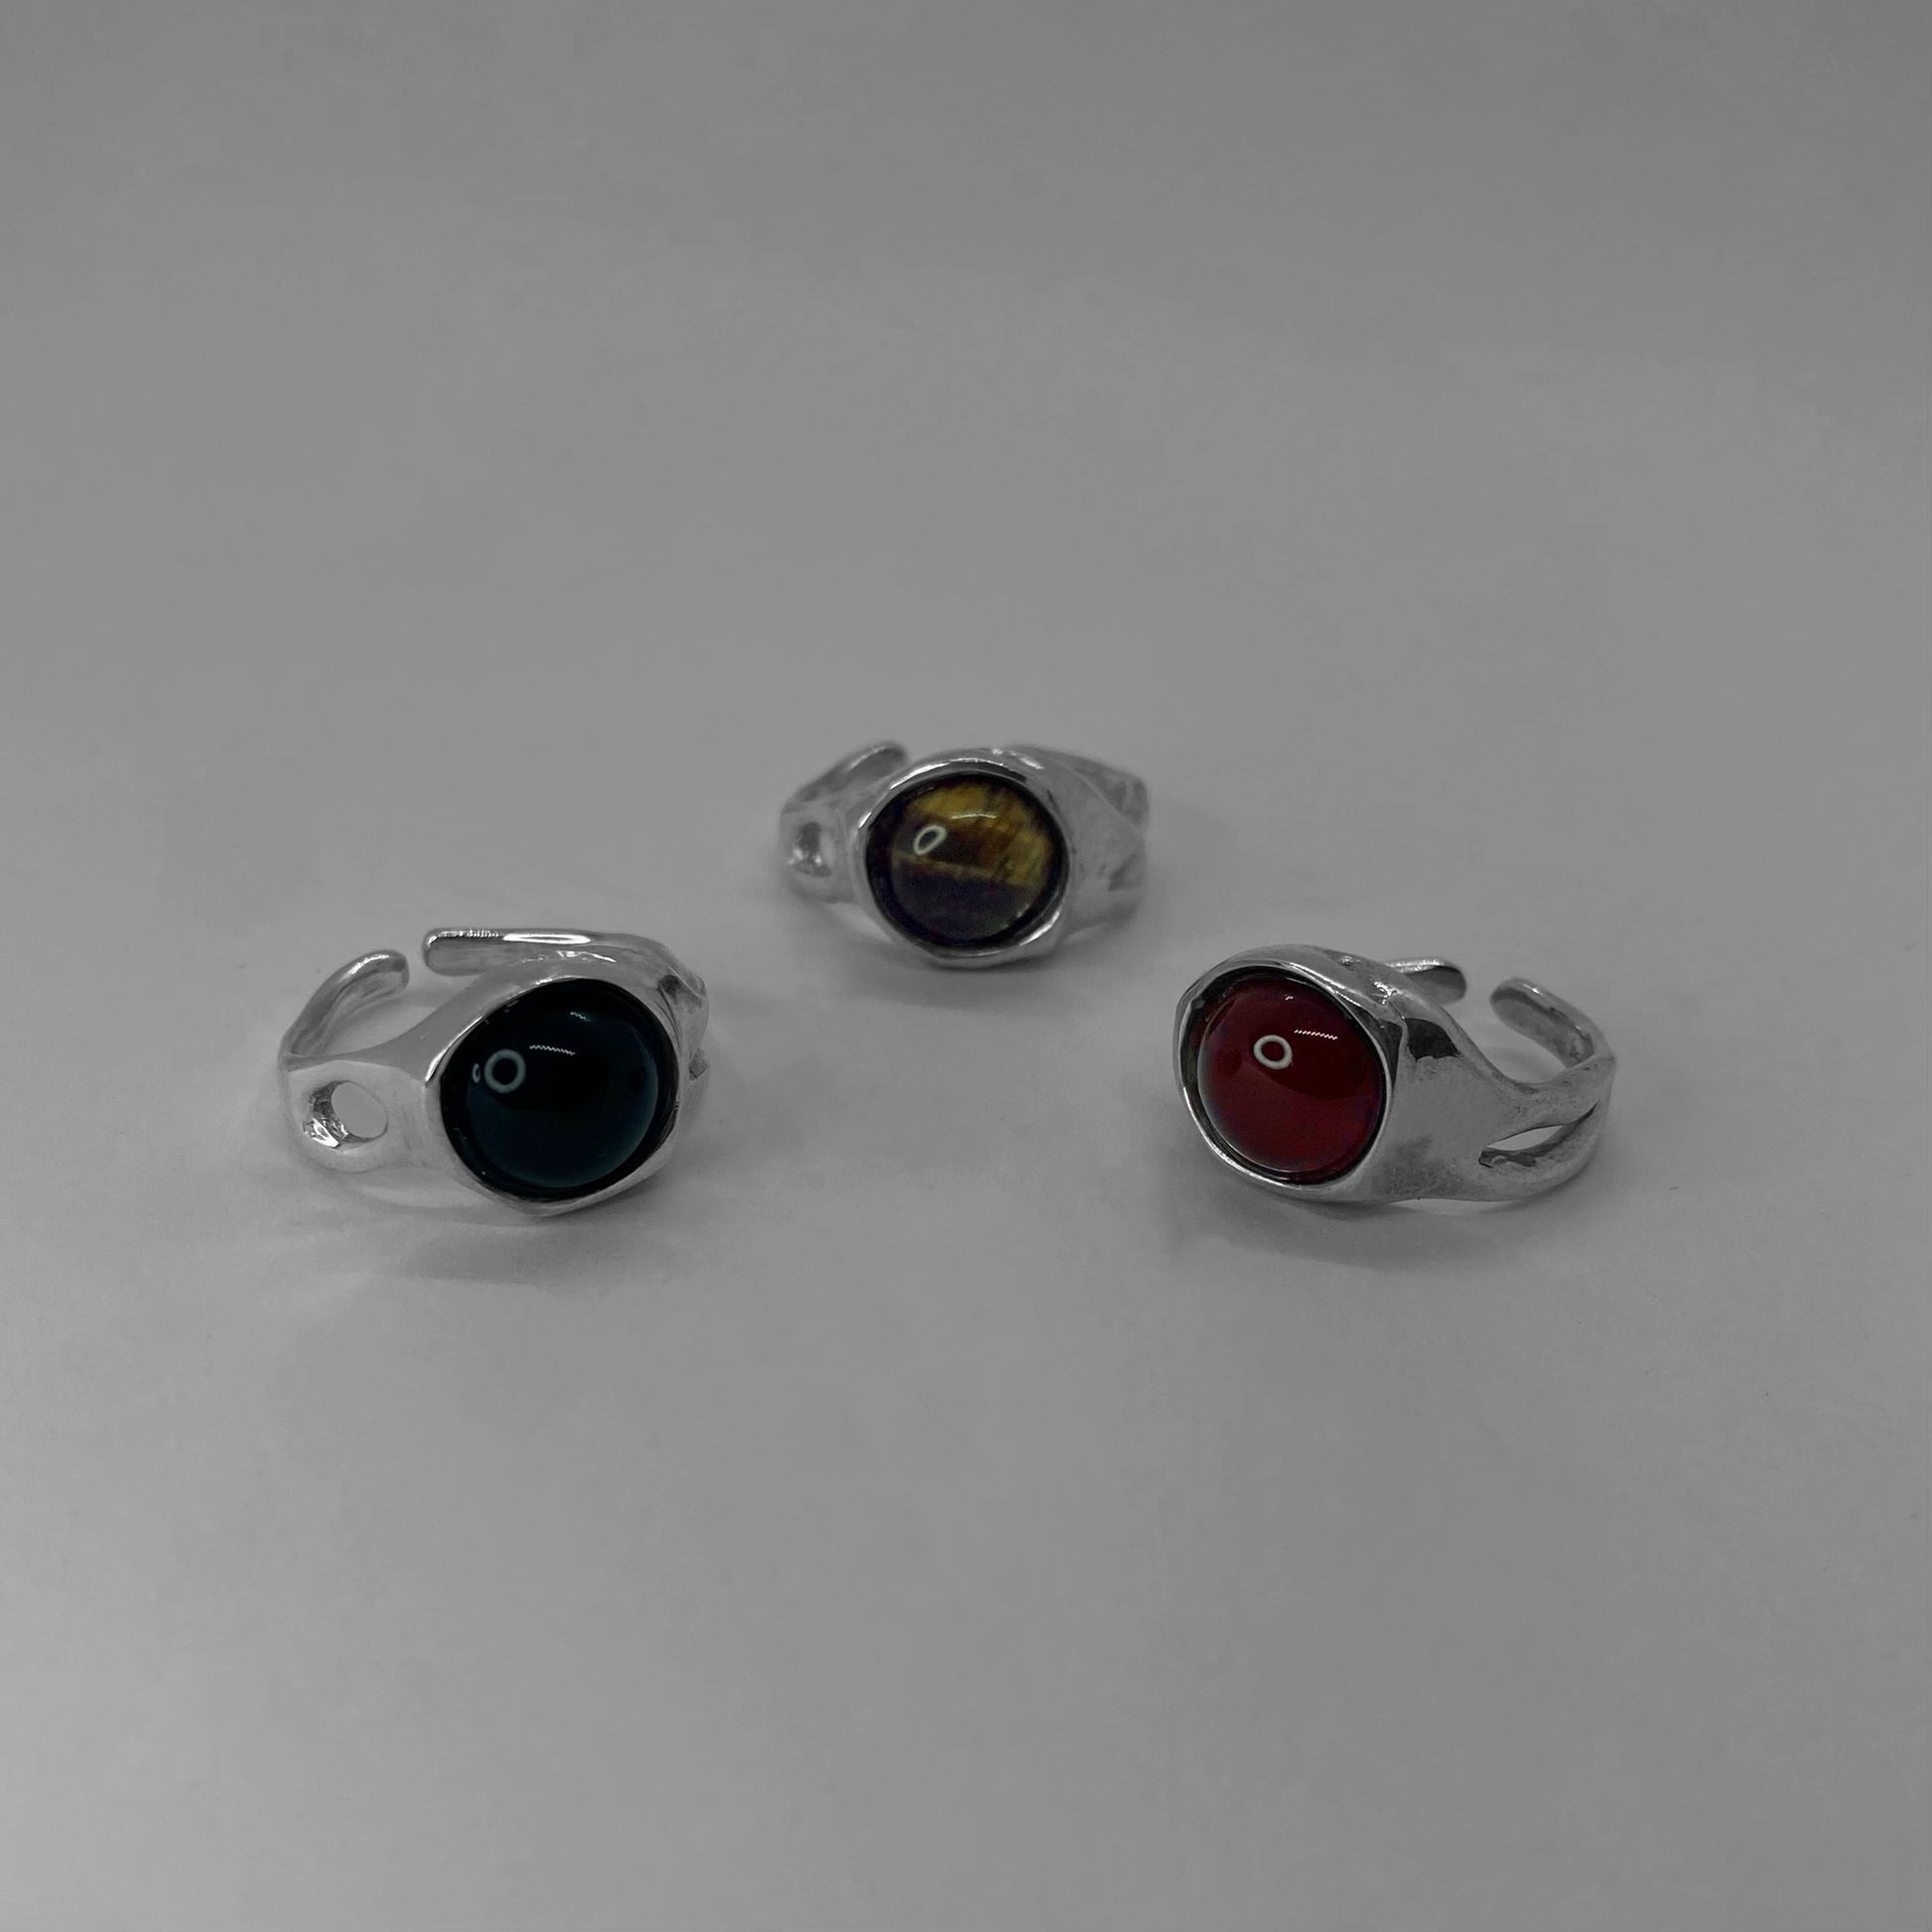 The Mineral ring is a handmade piece made of 925 sterling silver. It features a smooth and glossy surface, adorned with a semi-precious stone in three options: black agate, red carnelian, and brown tiger eye. Around the ring, there are openings, adding elements of elegance. The ring is open and adjustable, allowing for customization for up to three sizes. Therefore, it is important to know your ring size.